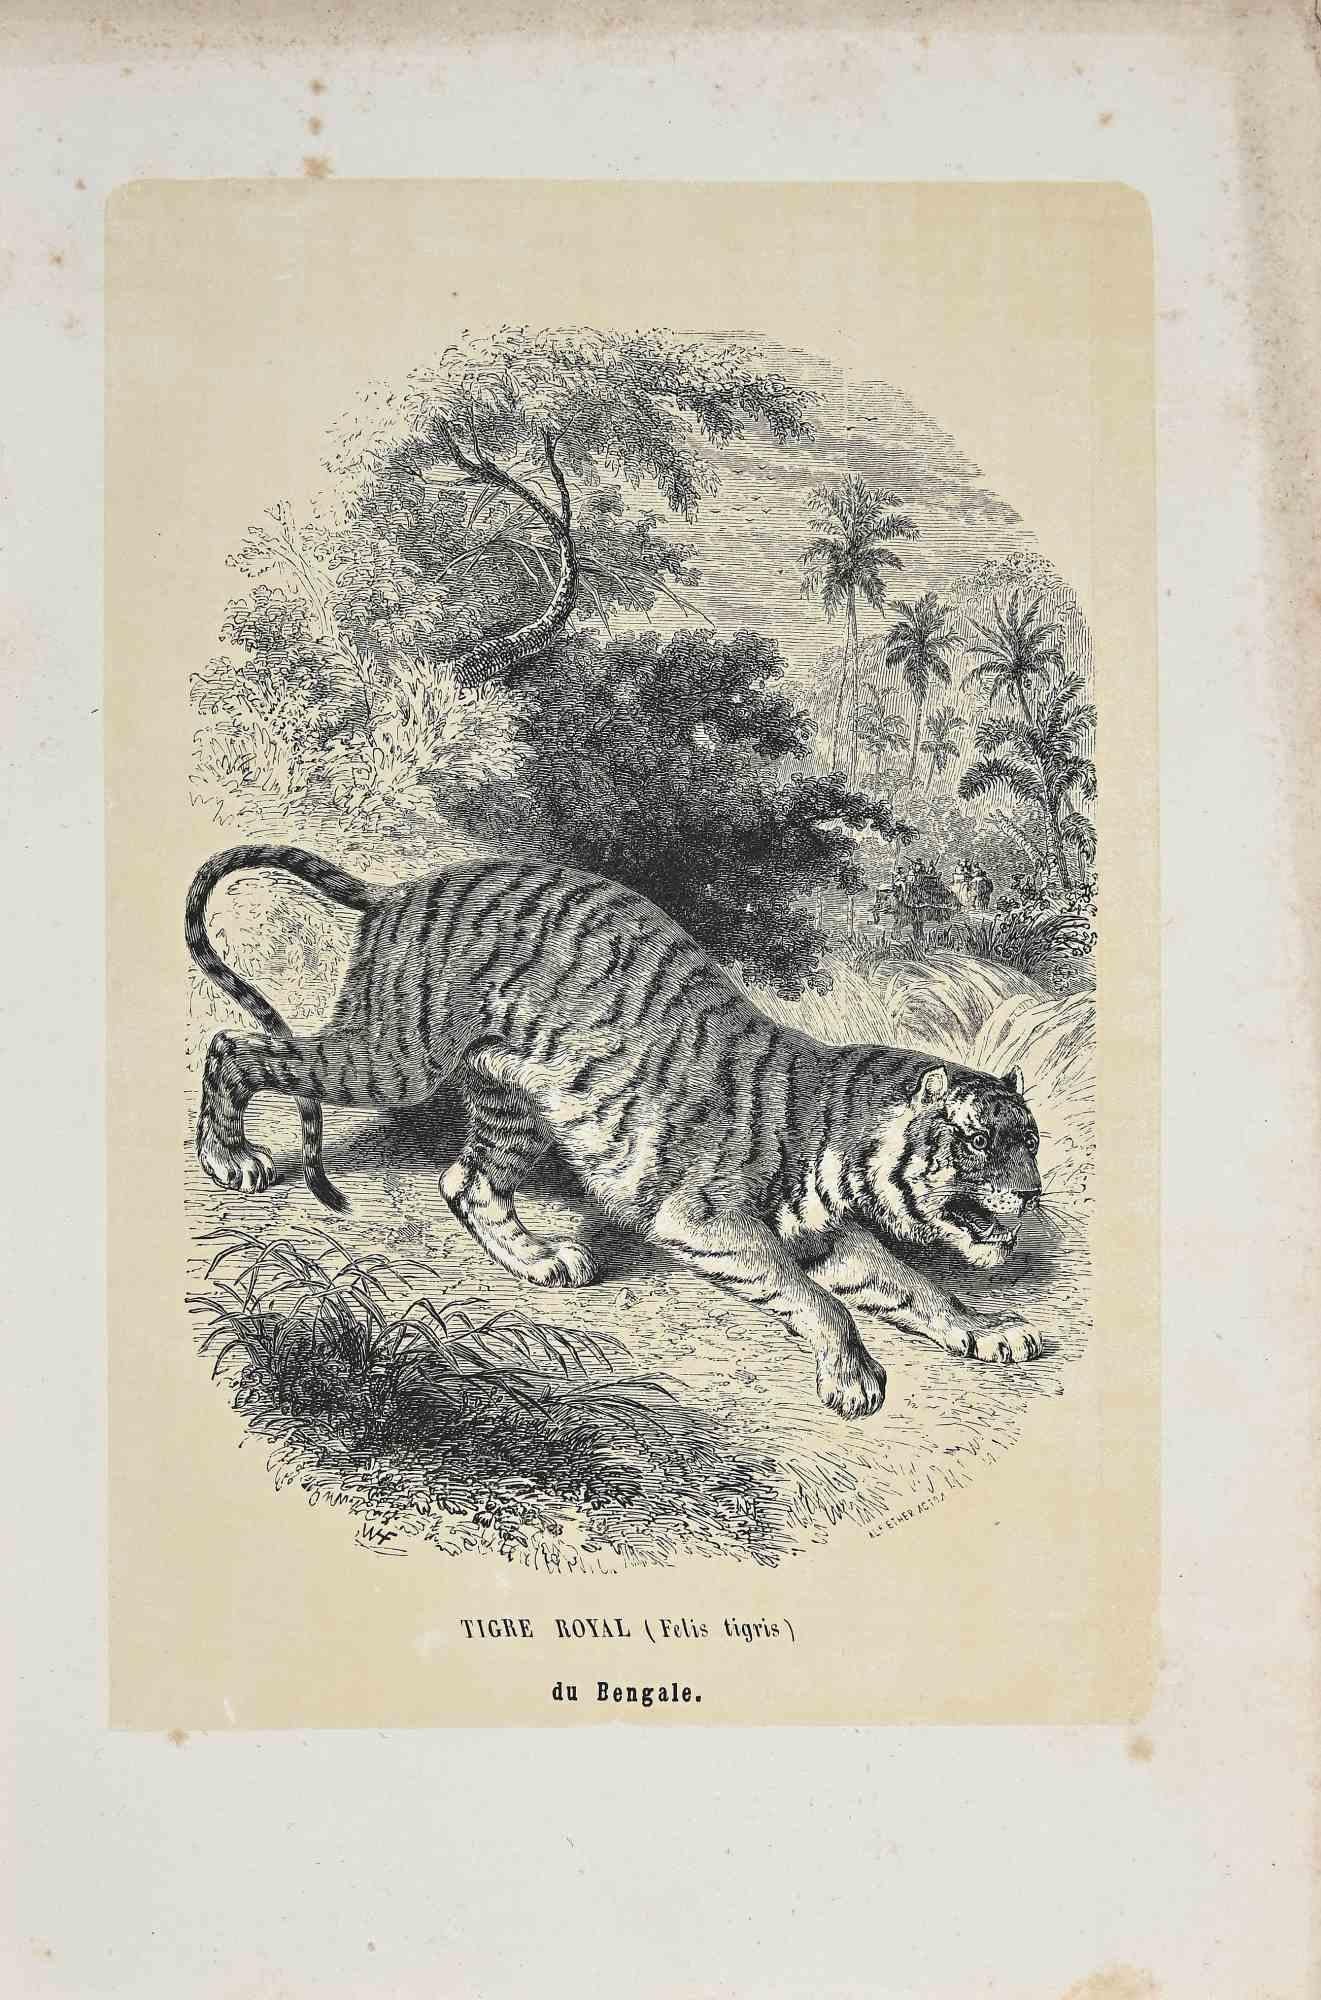 Royal Tiger is an original lithograph on ivory-colored paper, realized by Paul Gervais (1816-1879). The artwork is from The Series of "Les Trois Règnes de la Nature", and was published in 1854.

Good conditions with foxing along with the frame of